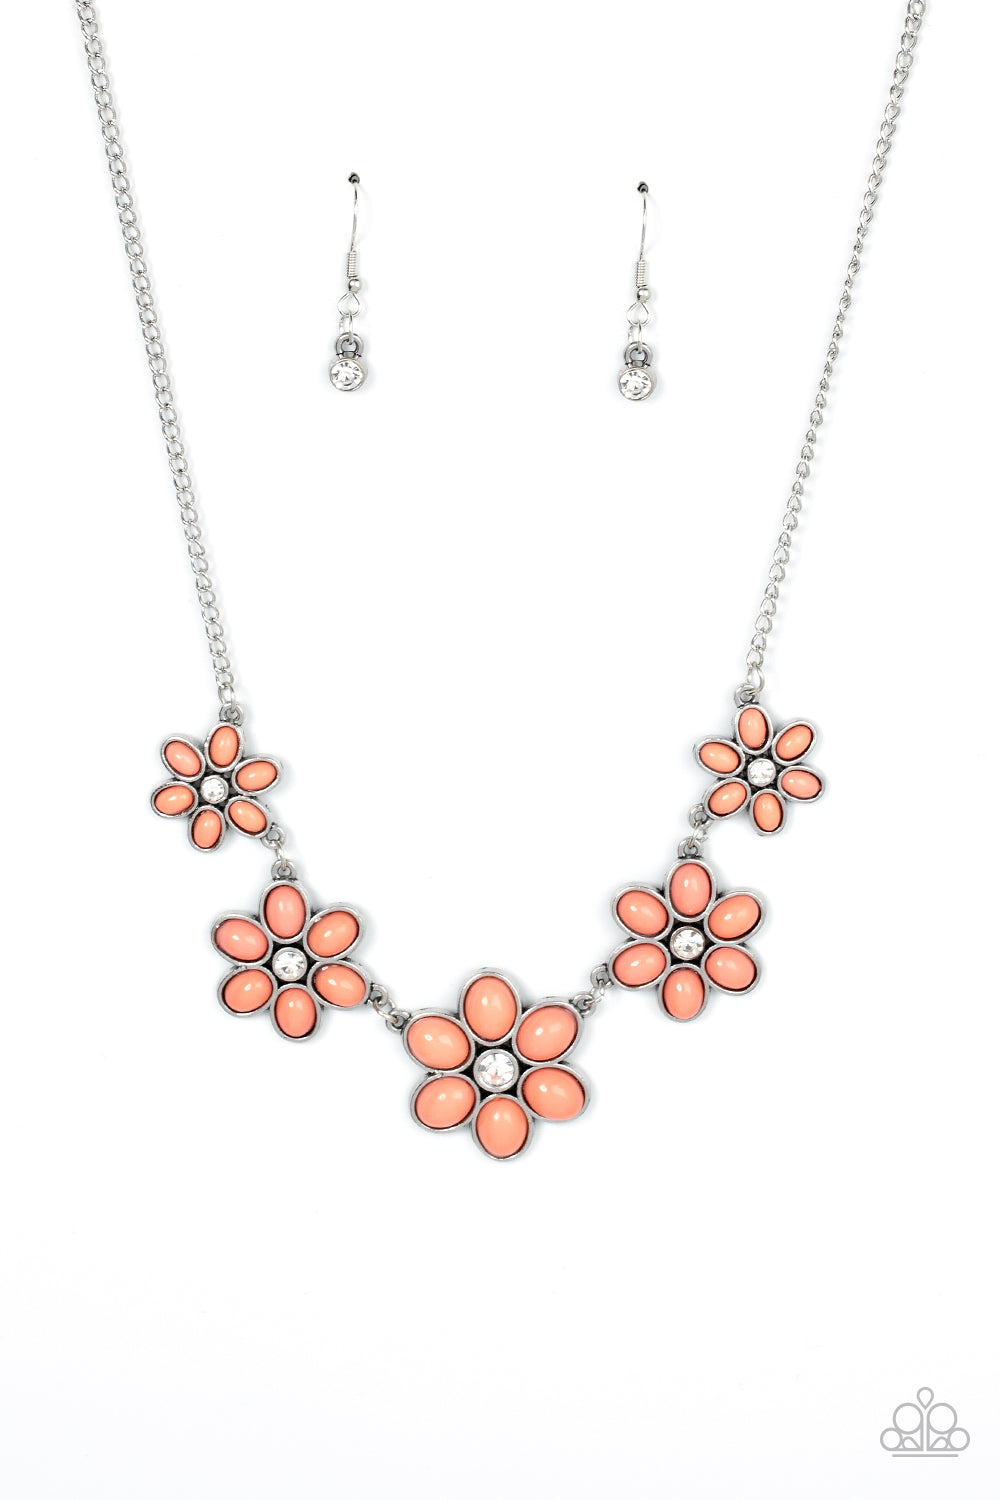 Prairie Party Orange Necklace - Paparazzi Accessories  Dotted with dainty white rhinestone centers, a flirtatious assortment of coral beaded flowers gradually increase in size as they link below the collar for a playful pop of color. Features an adjustable clasp closure.  Sold as one individual necklace. Includes one pair of matching earrings.